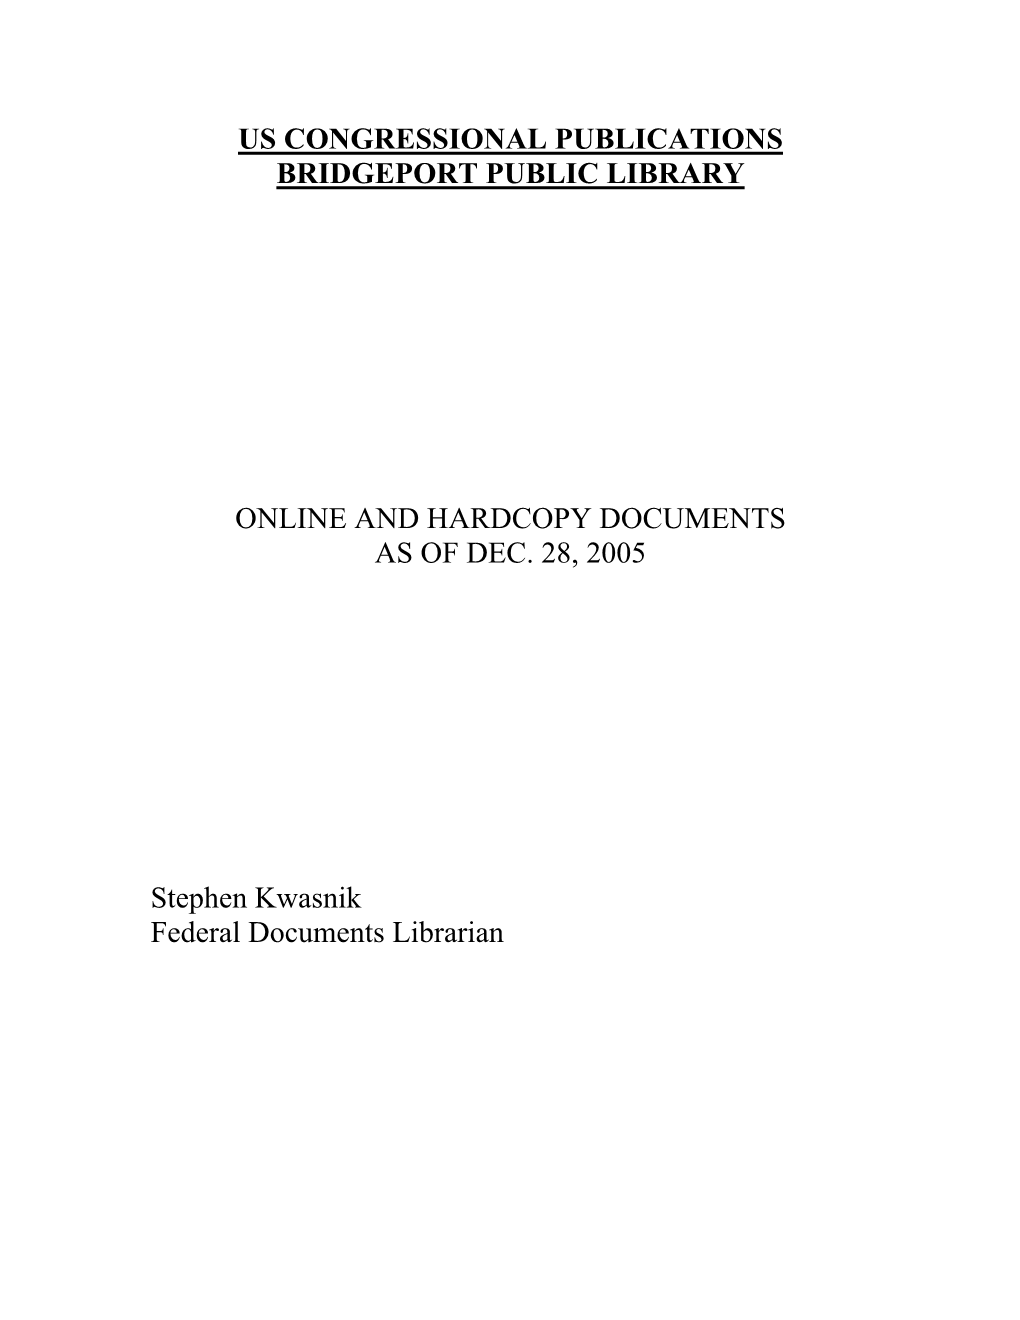 Congressional Documents: Browse.” GPO Access